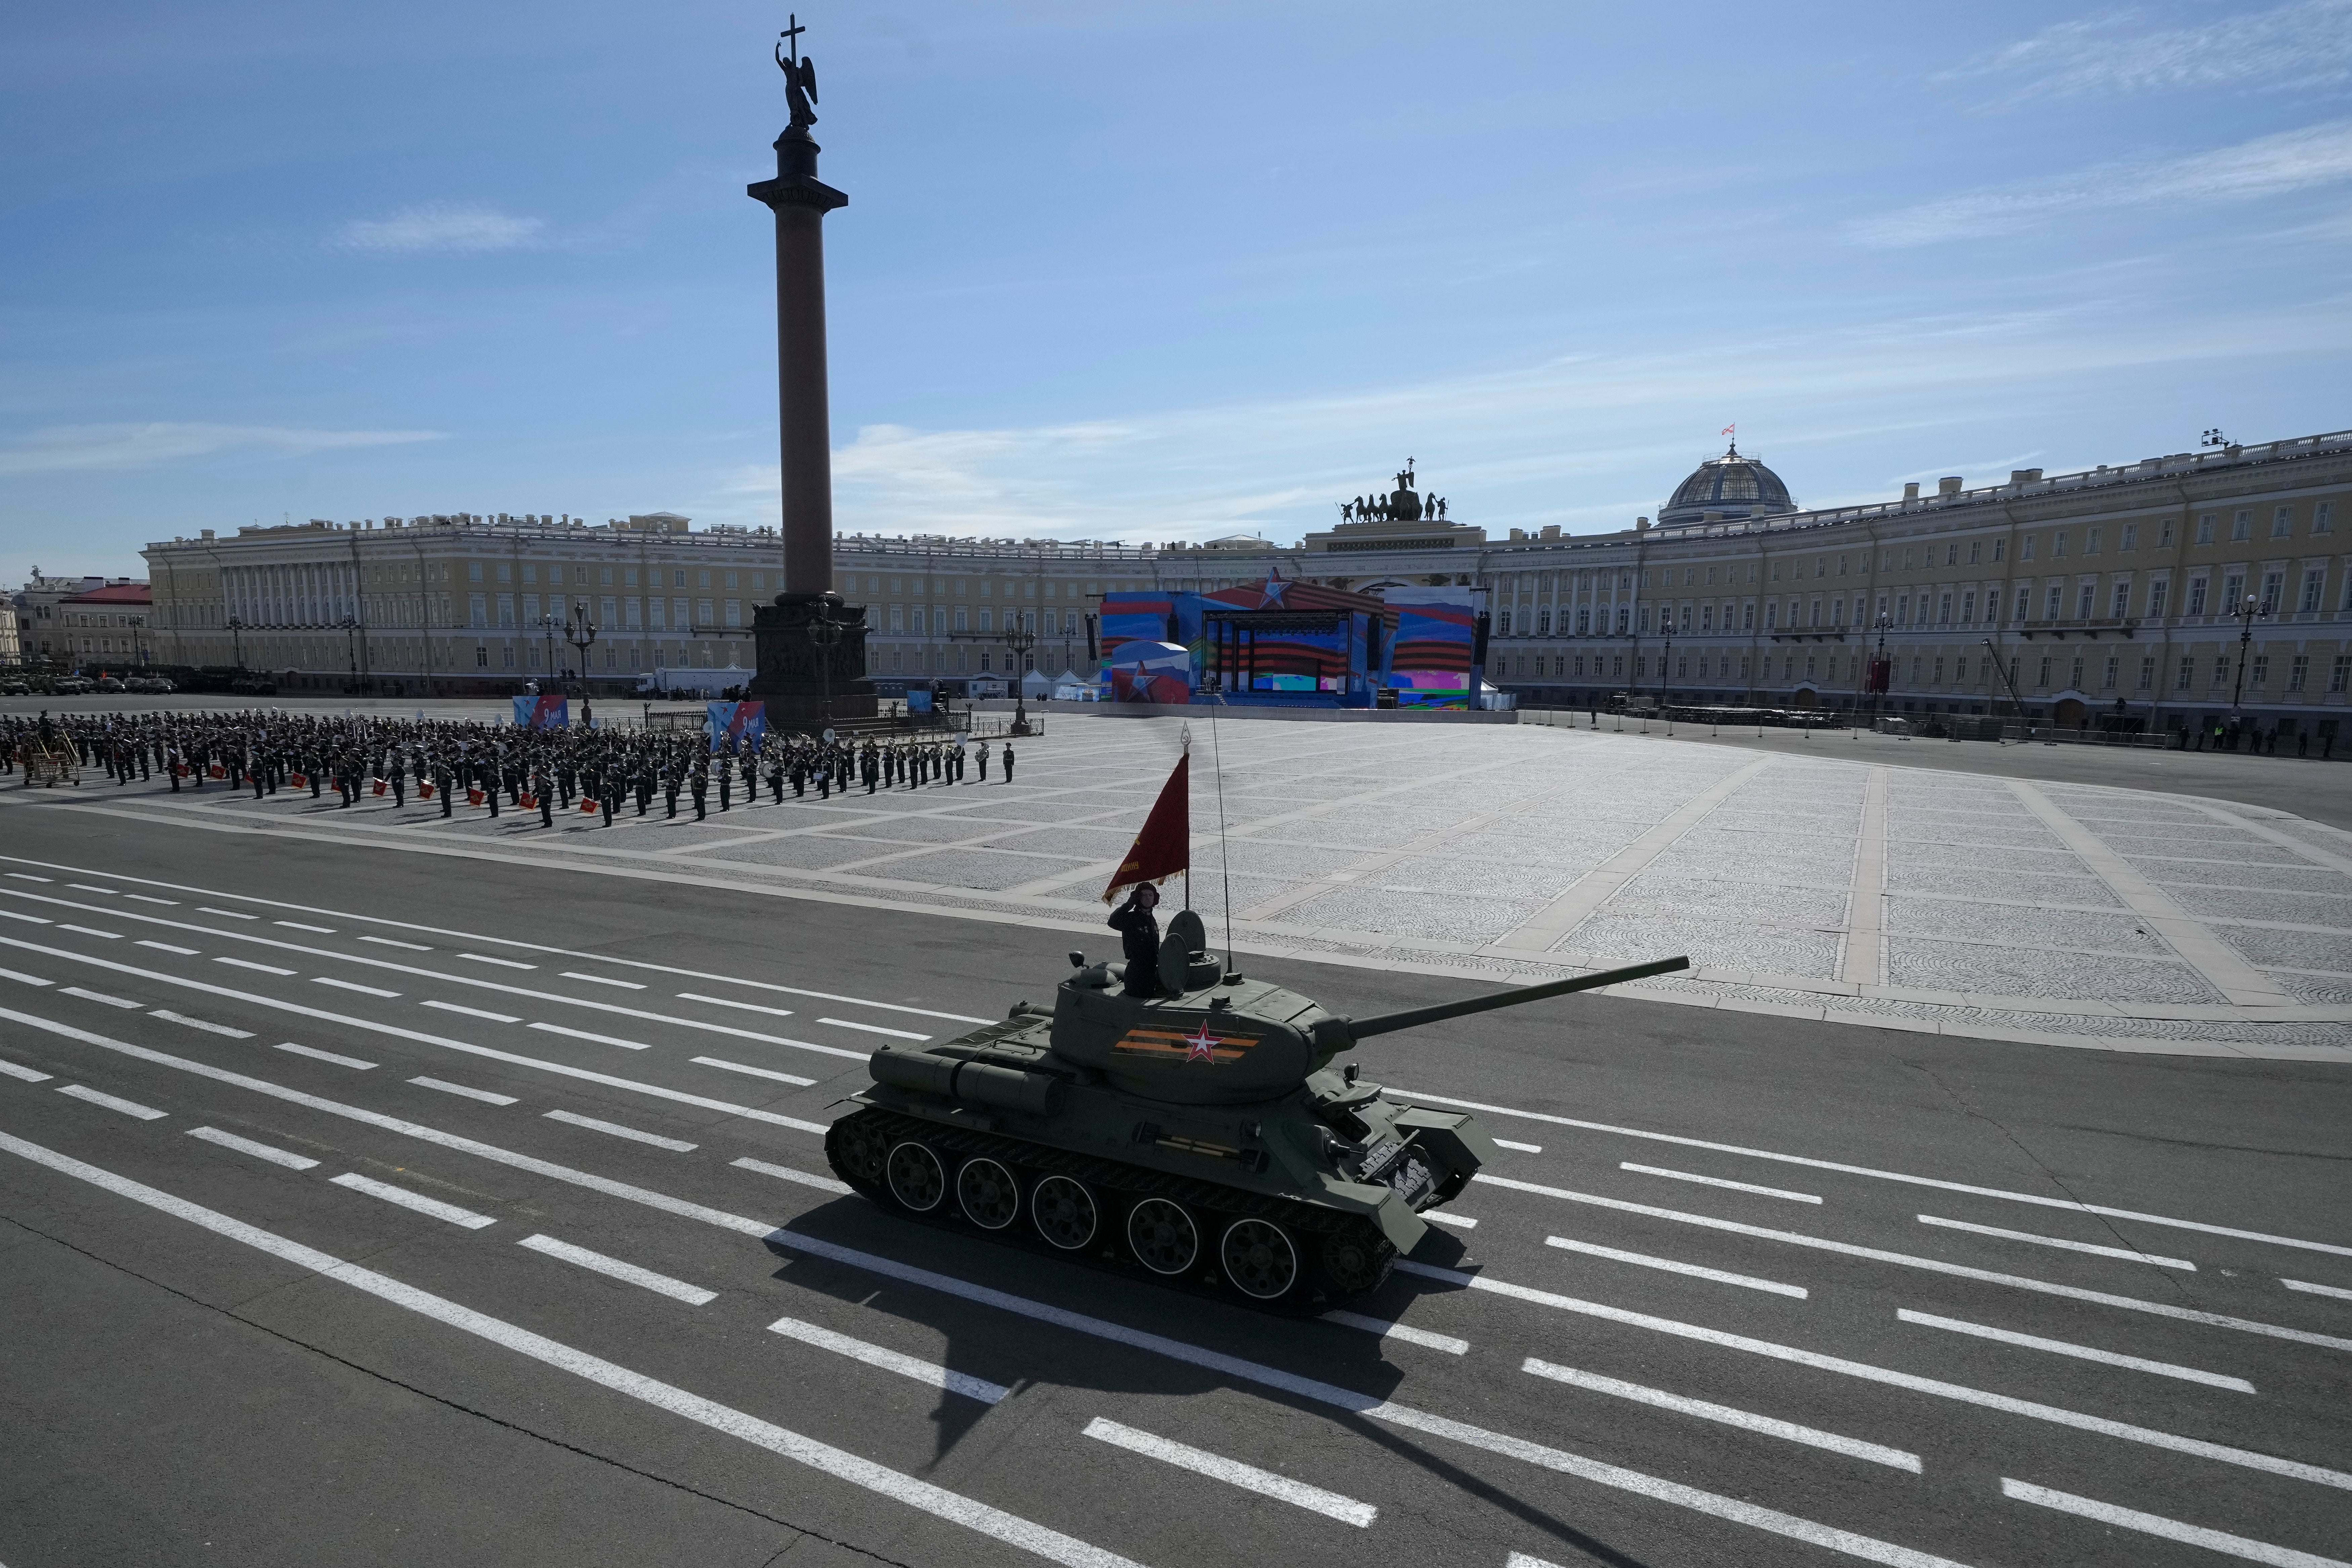 The T-34 was also the sole tank on display in last year’s parade